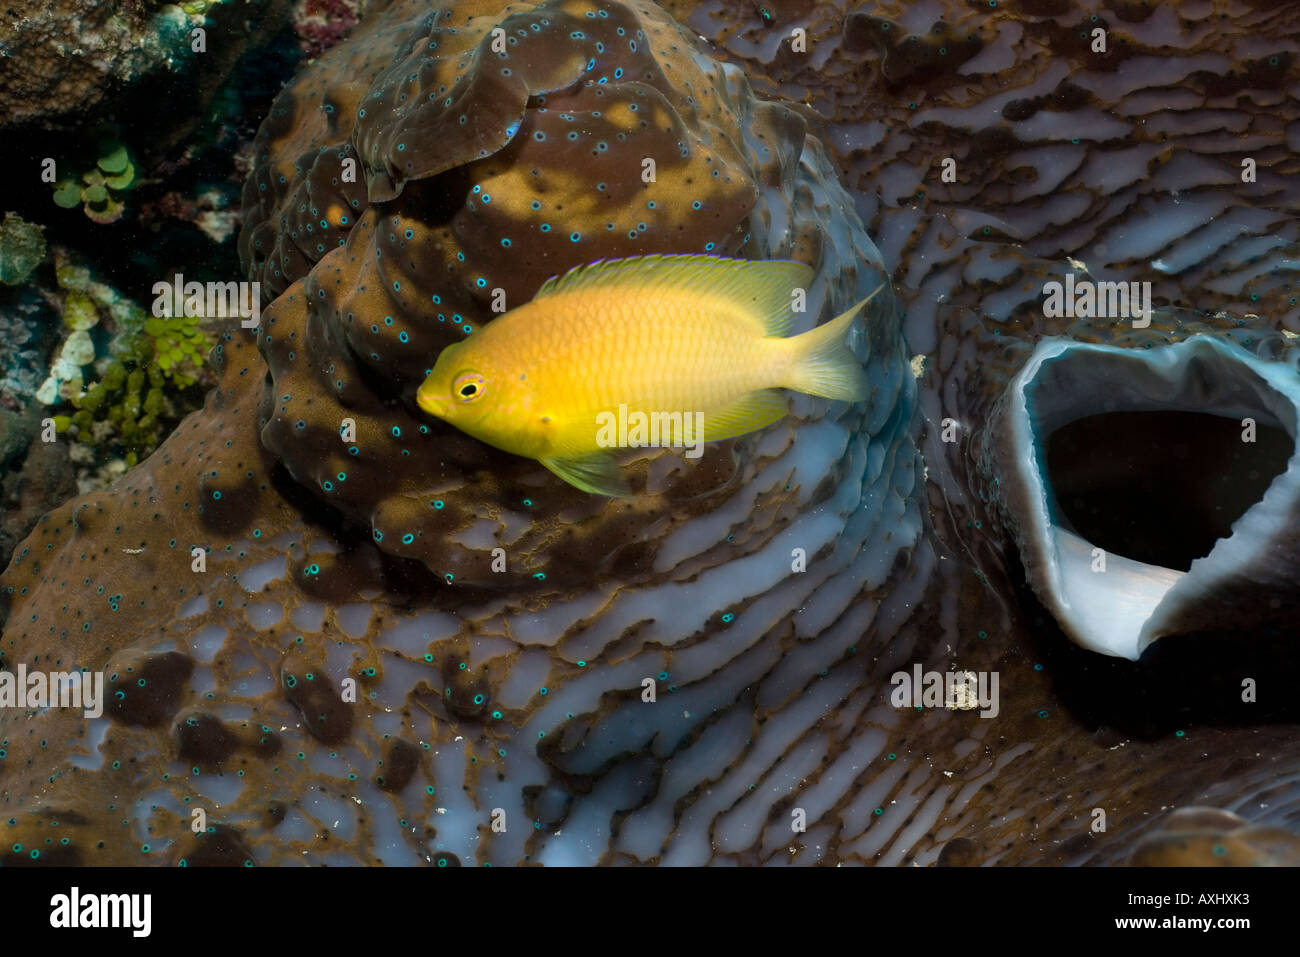 CLOSE UP OF A GOLDEN DAMSELFISH AMBLYGLYPHIDODON AUREUS NEXT TO THE OPEN SIPHON OF A GIANT TRIDACNA CLAM TRIDACNA GIGAS Stock Photo